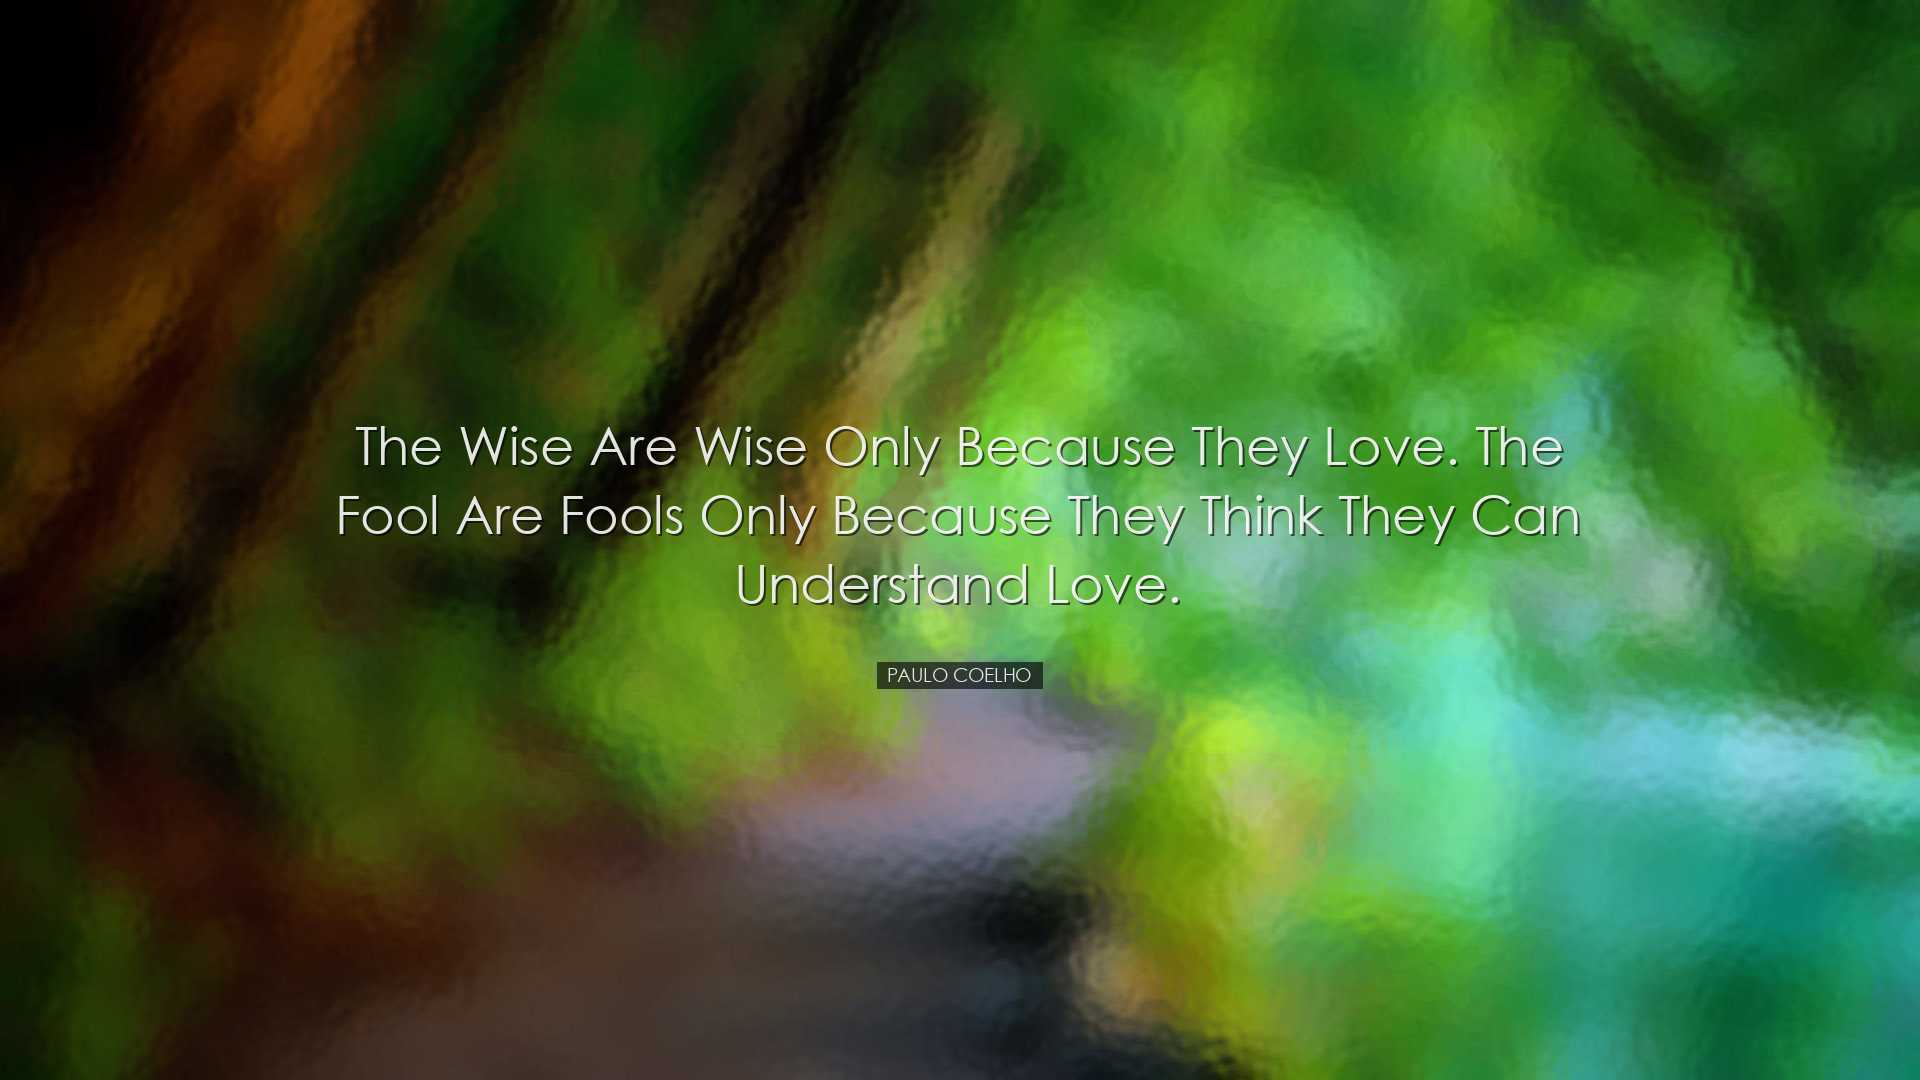 The wise are wise only because they love. The fool are fools only